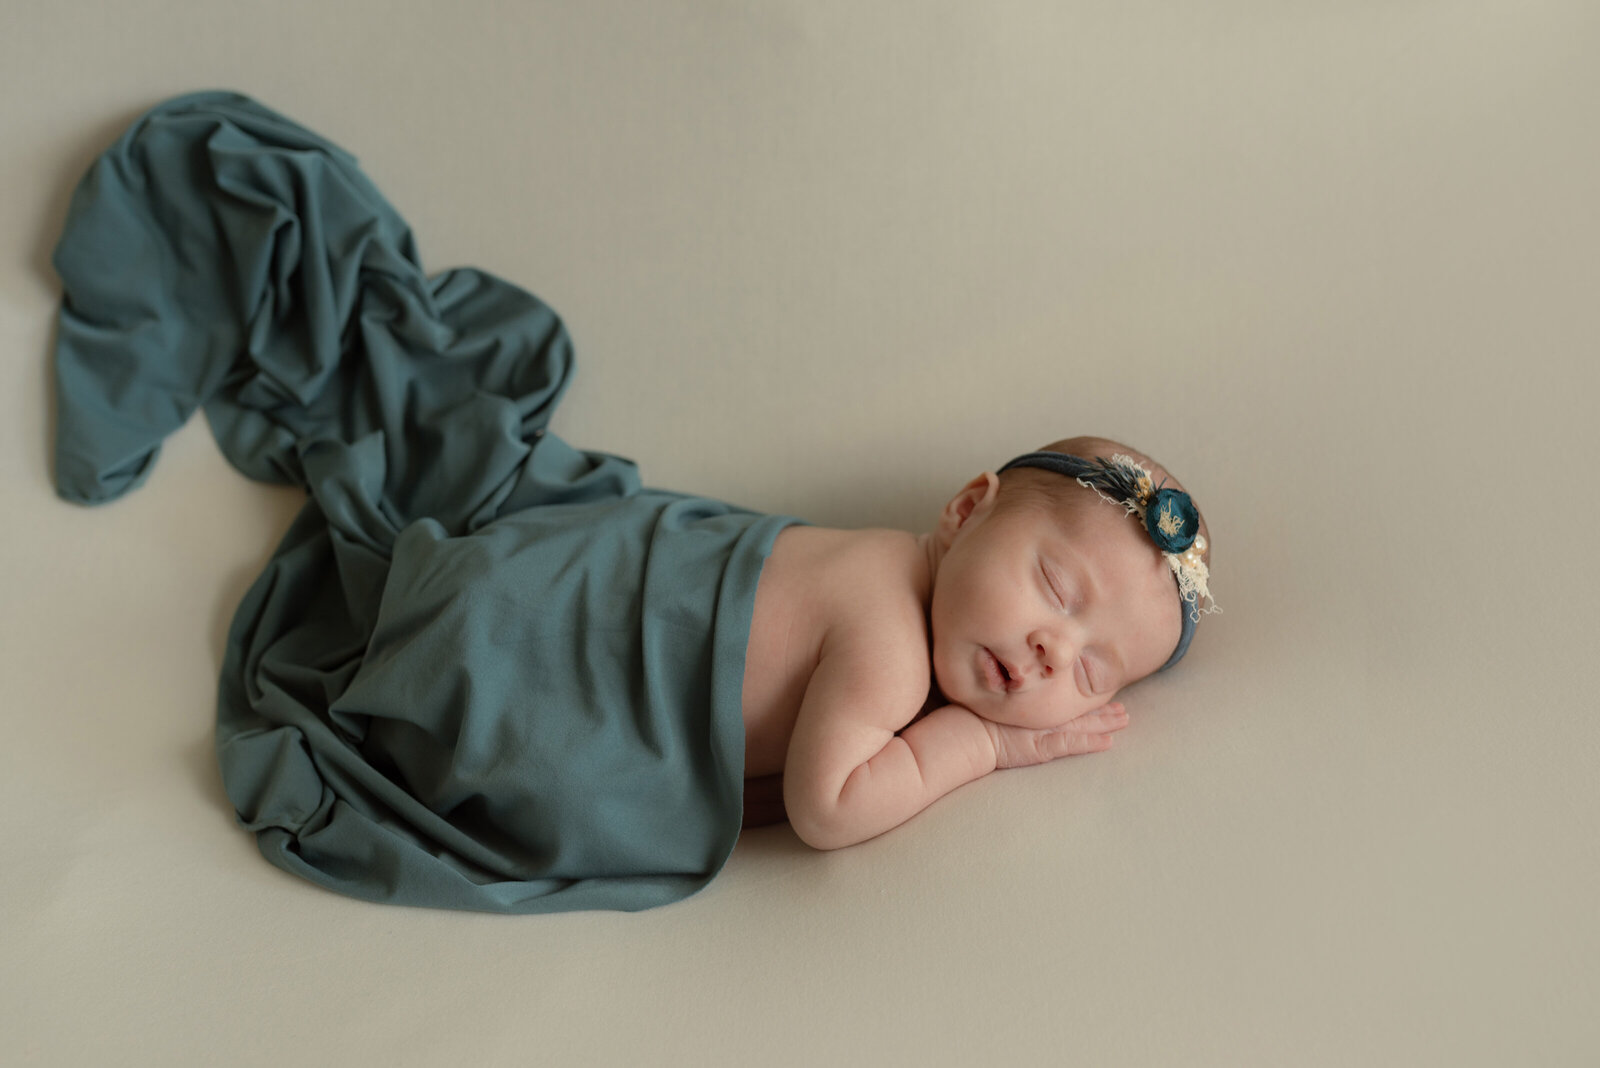 Newborn on belly posed with teal blue wrap and dried flower teal blue headband